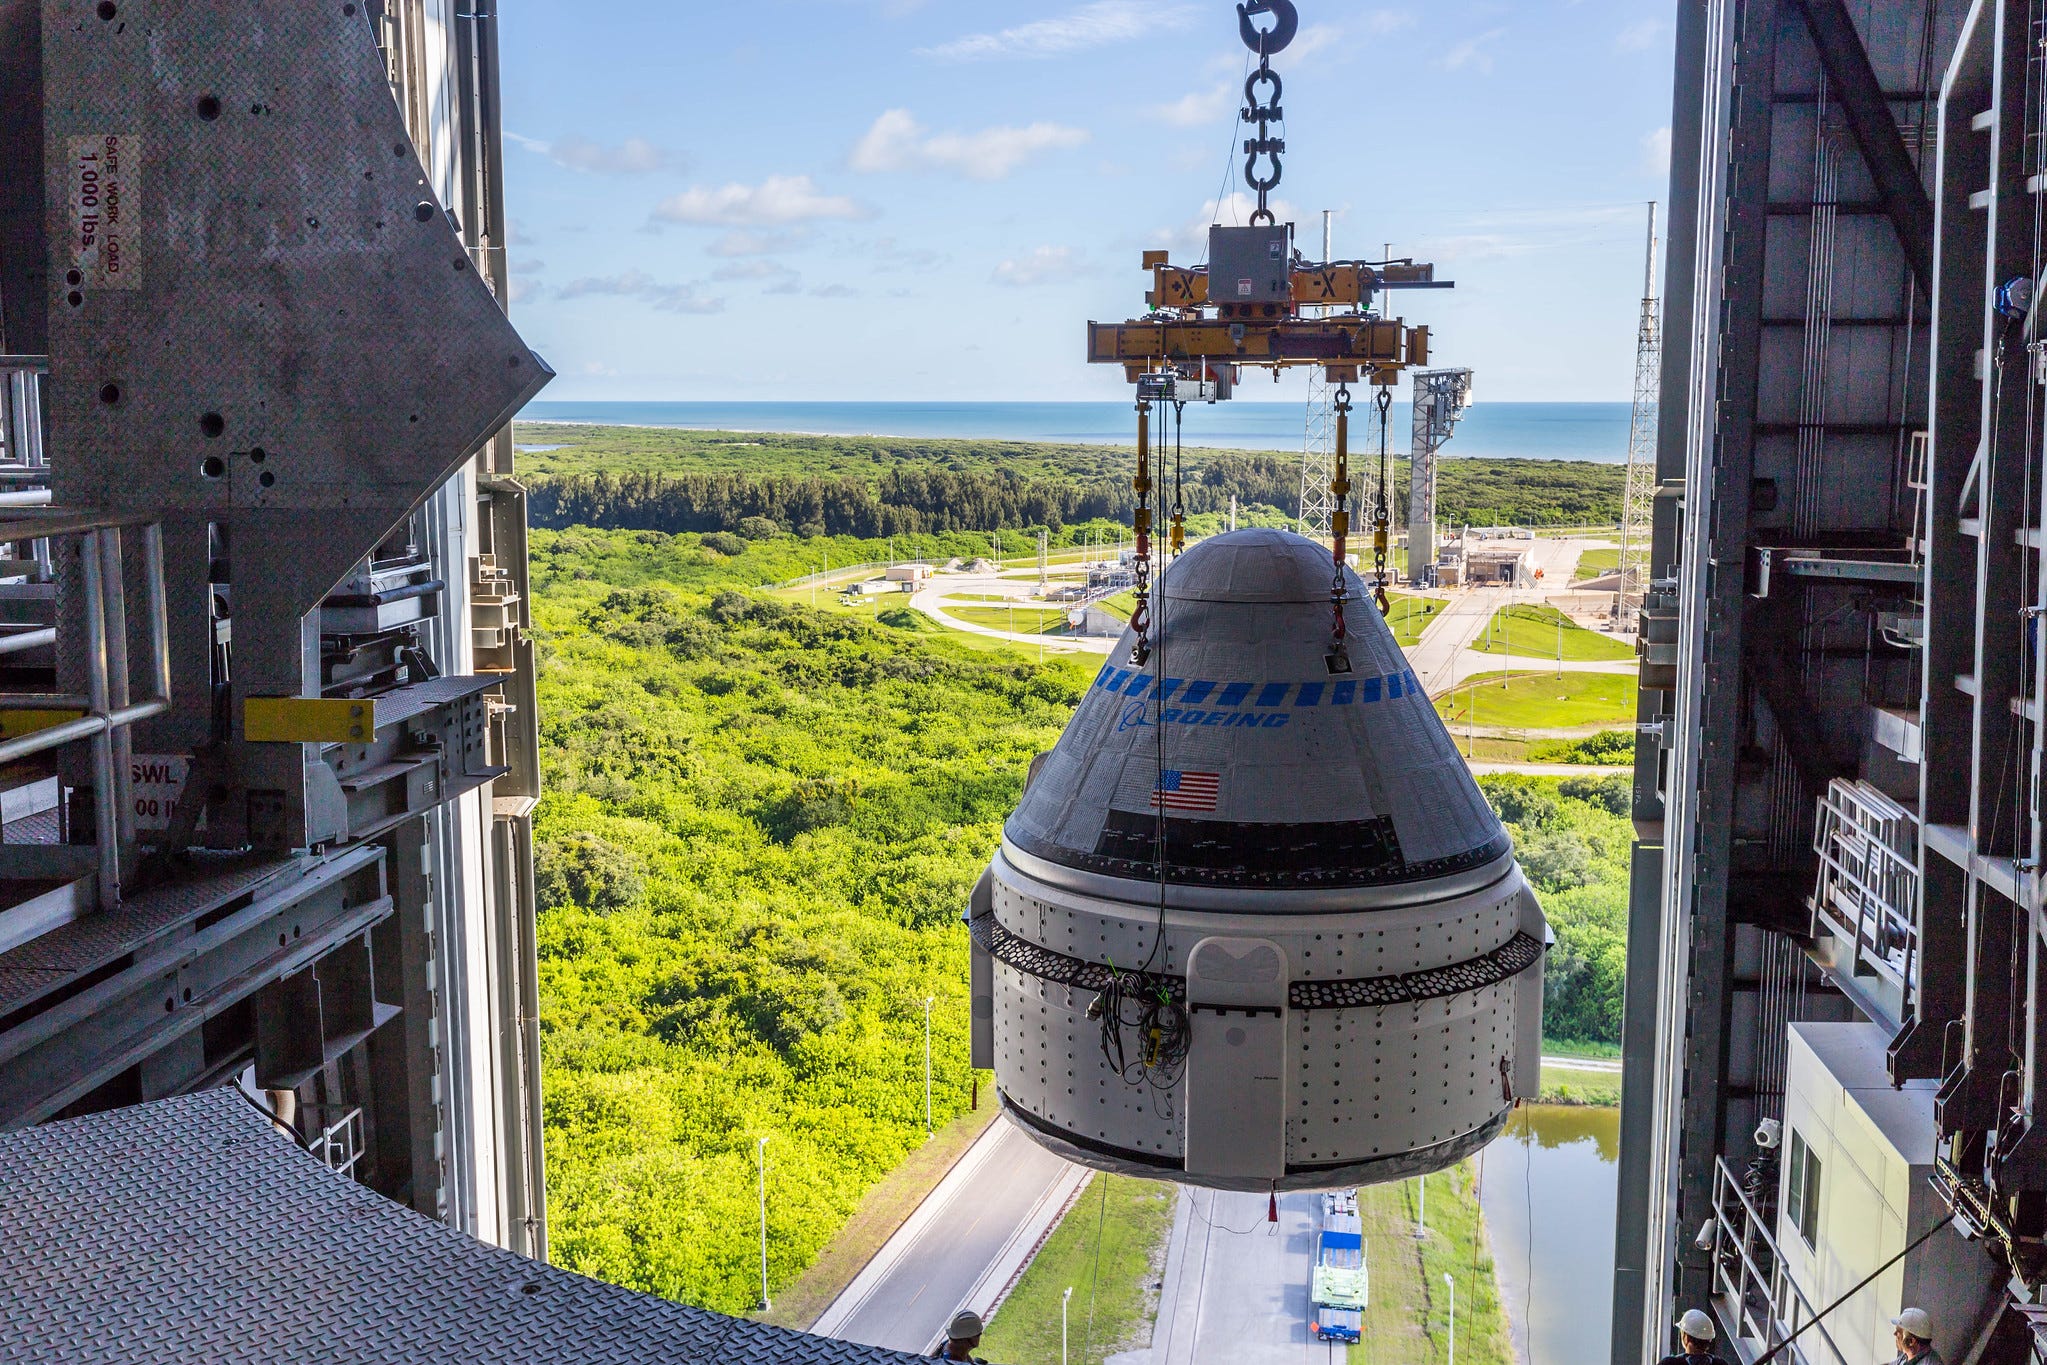 Boeing Starliner capsule lifted at Pad 41